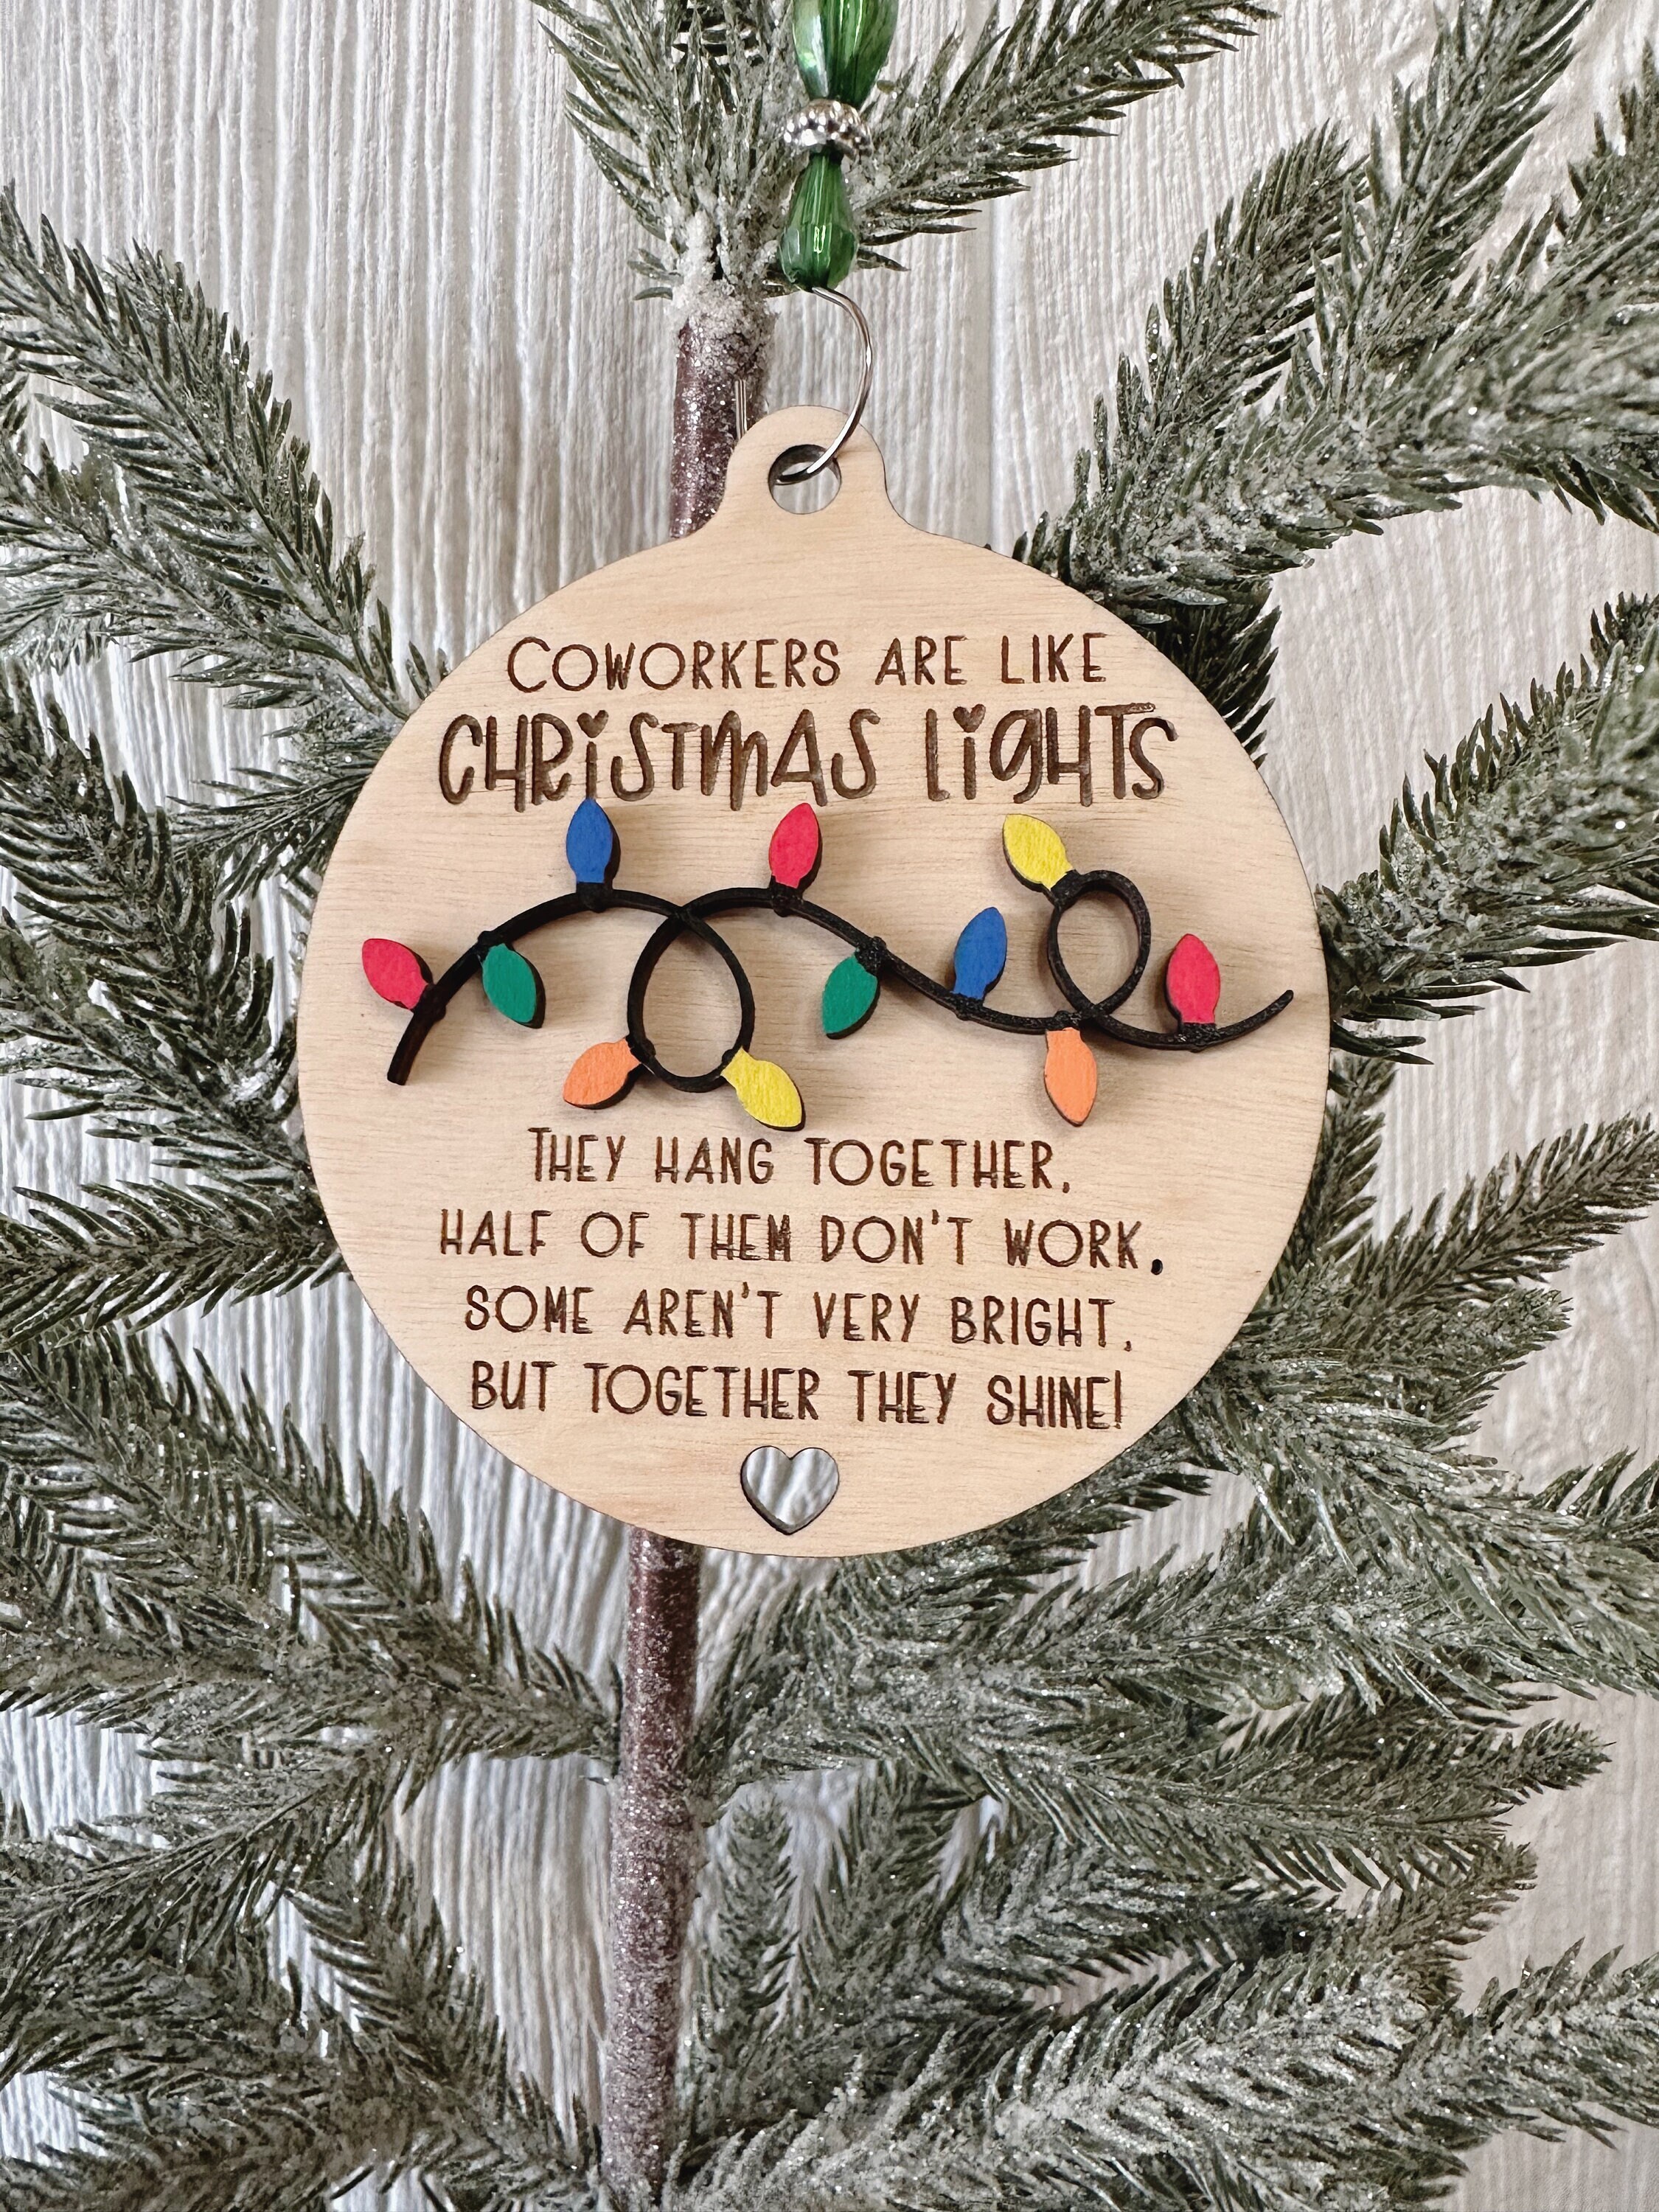 Coworker Made Us Friends Personalized 2 Layered Christmas Ornament